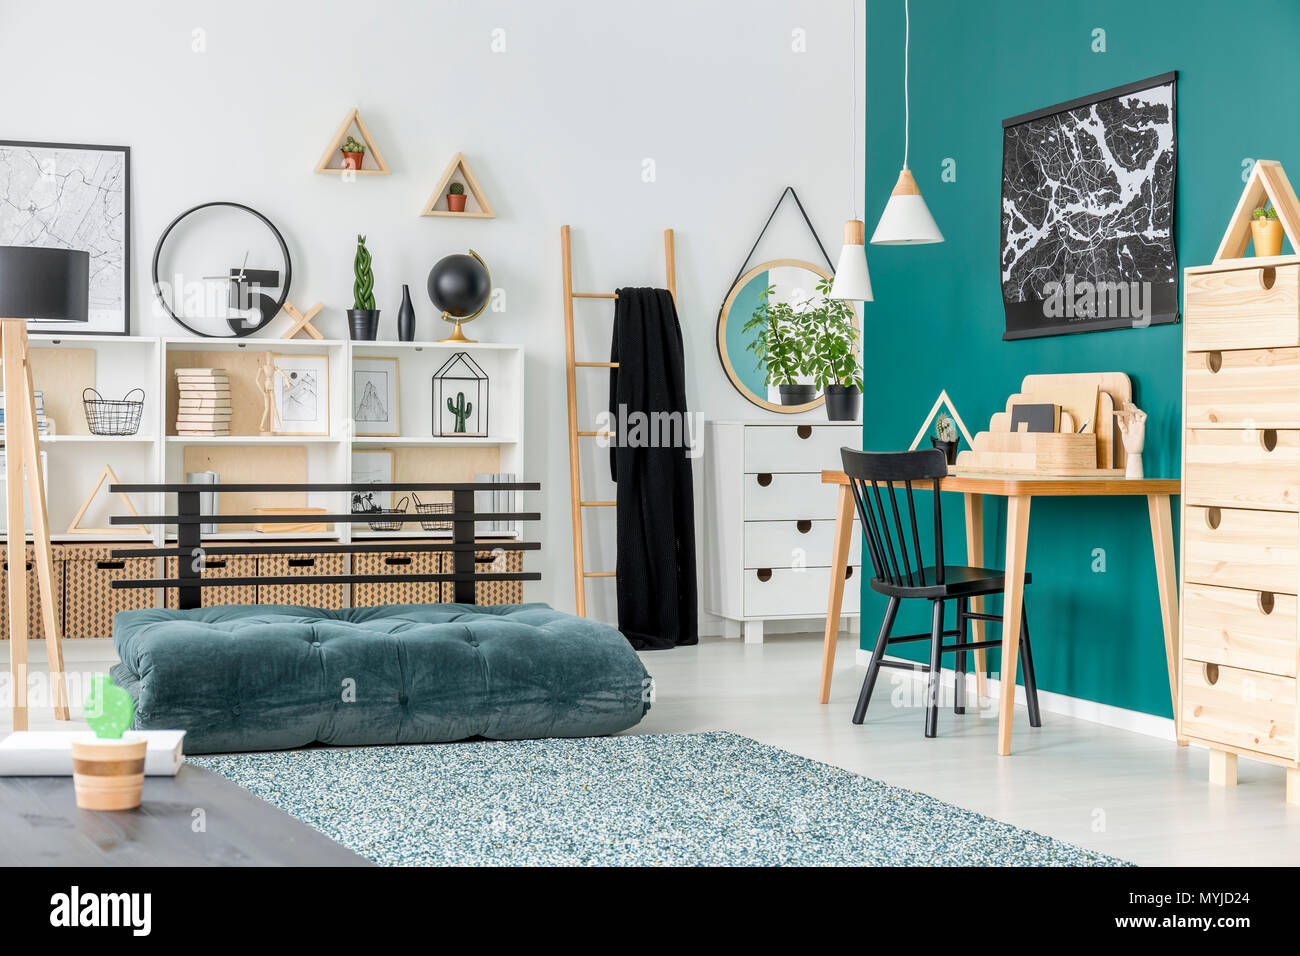 Black chair at wooden desk in kid's room interior with green mattress near patterned carpet Stock Photo